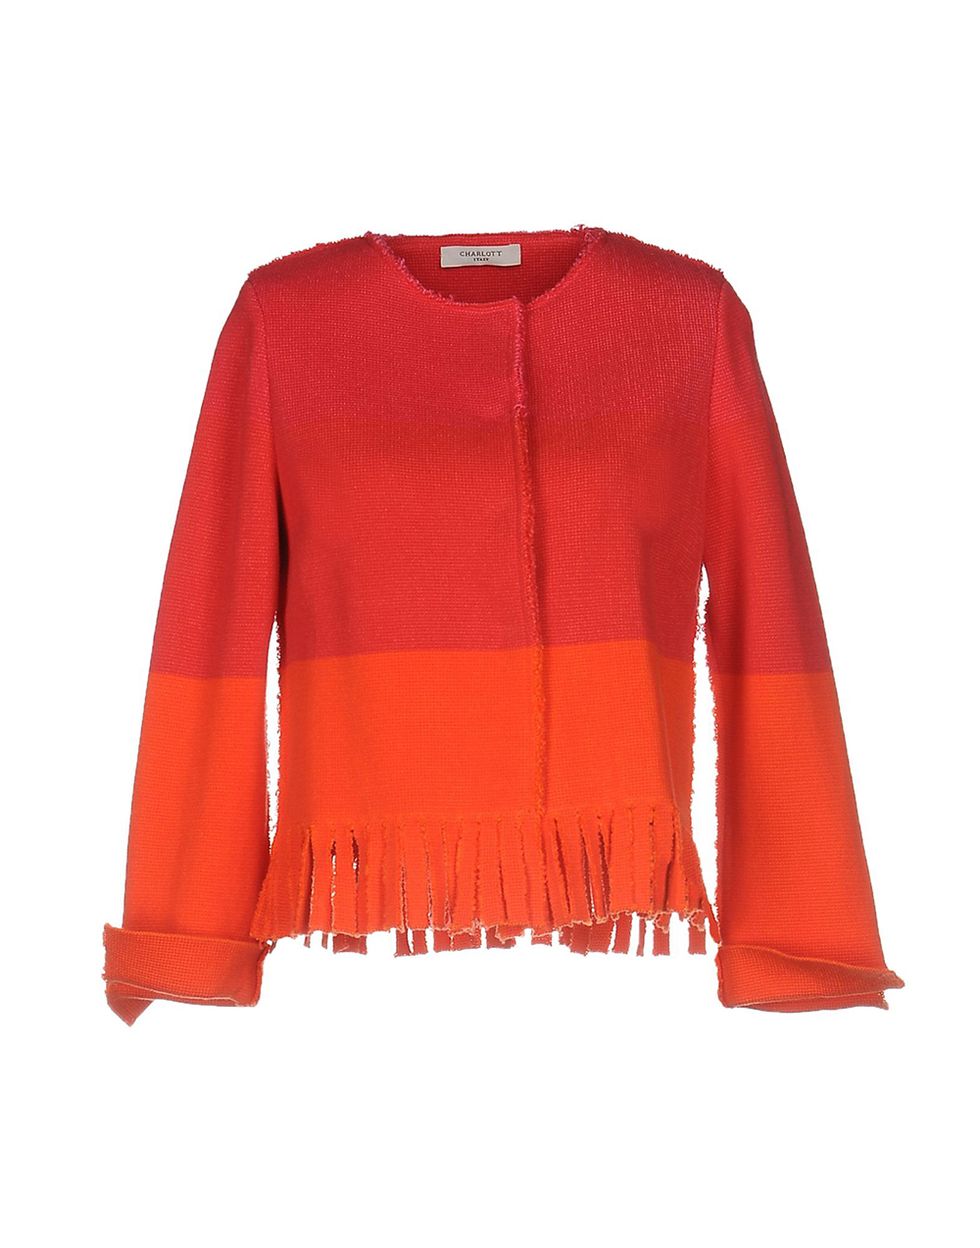 Clothing, Red, Outerwear, Orange, Sleeve, Blouse, Top, Sweater, Jacket, Coquelicot, 